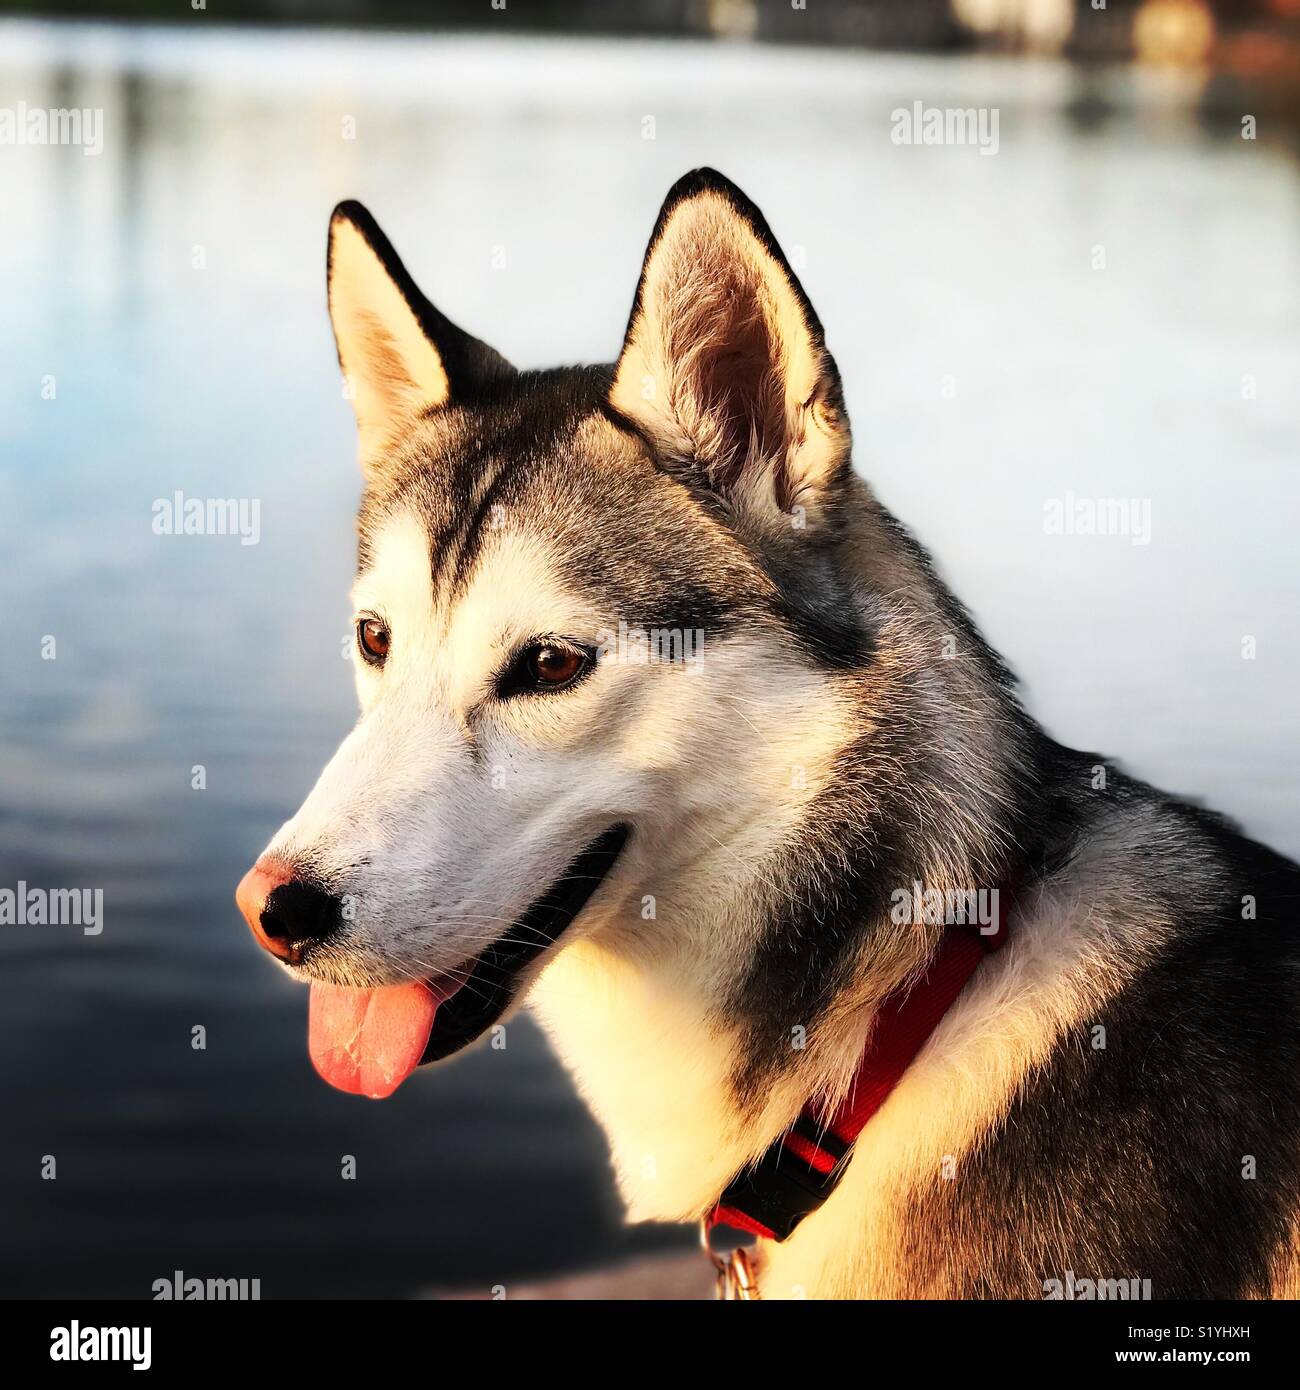 Lively Husky Dog Side View Greeting Card for Sale by NorseTech